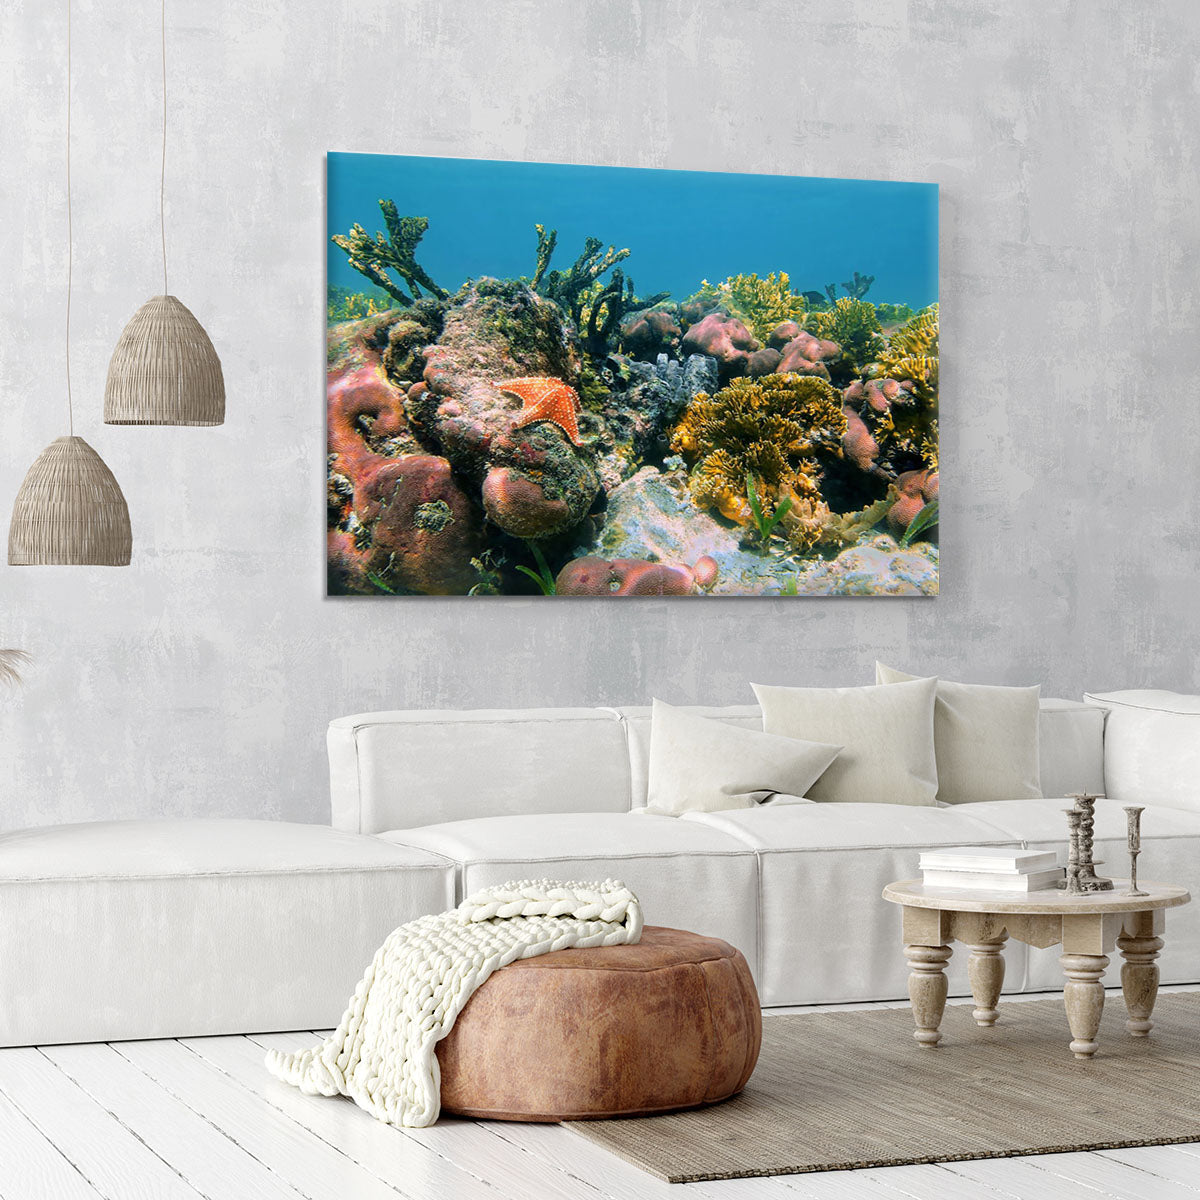 Underwater reef in the Caribbean sea with corals sponges and a starfish Canvas Print or Poster - Canvas Art Rocks - 6